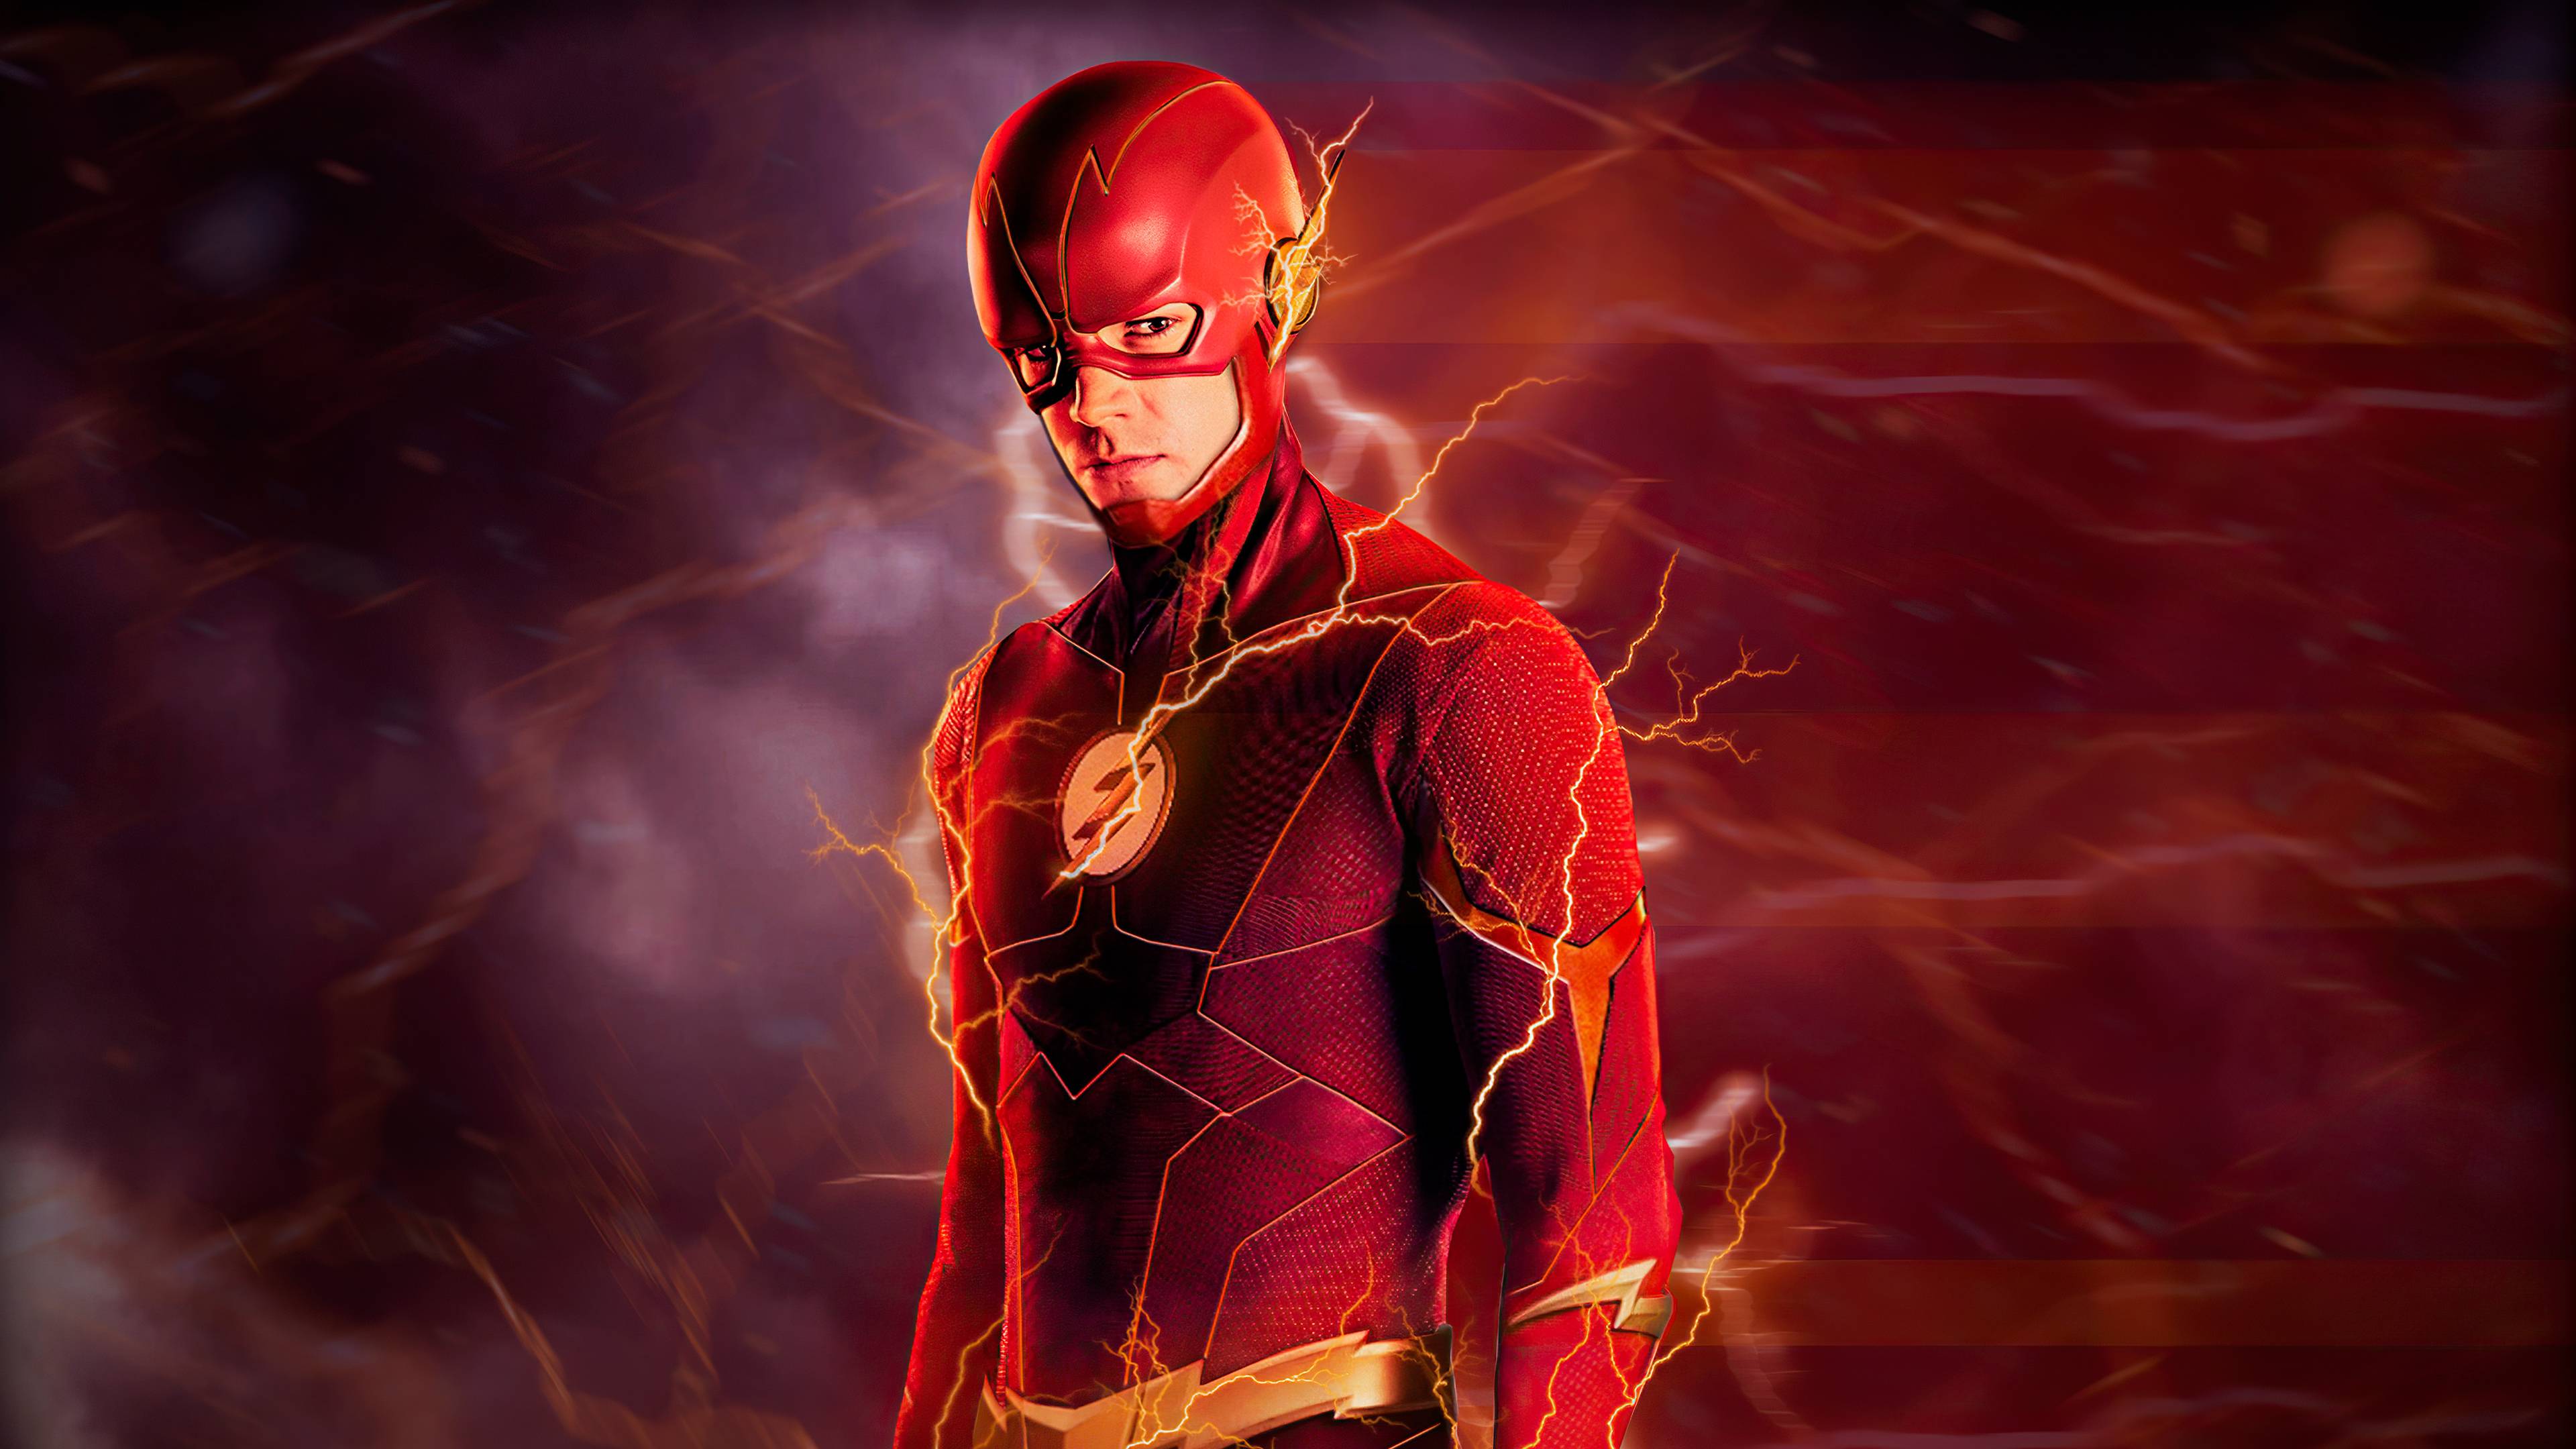 2000x1436 Reverse-Flash, Flash wallpaper - Coolwallpapers.me!